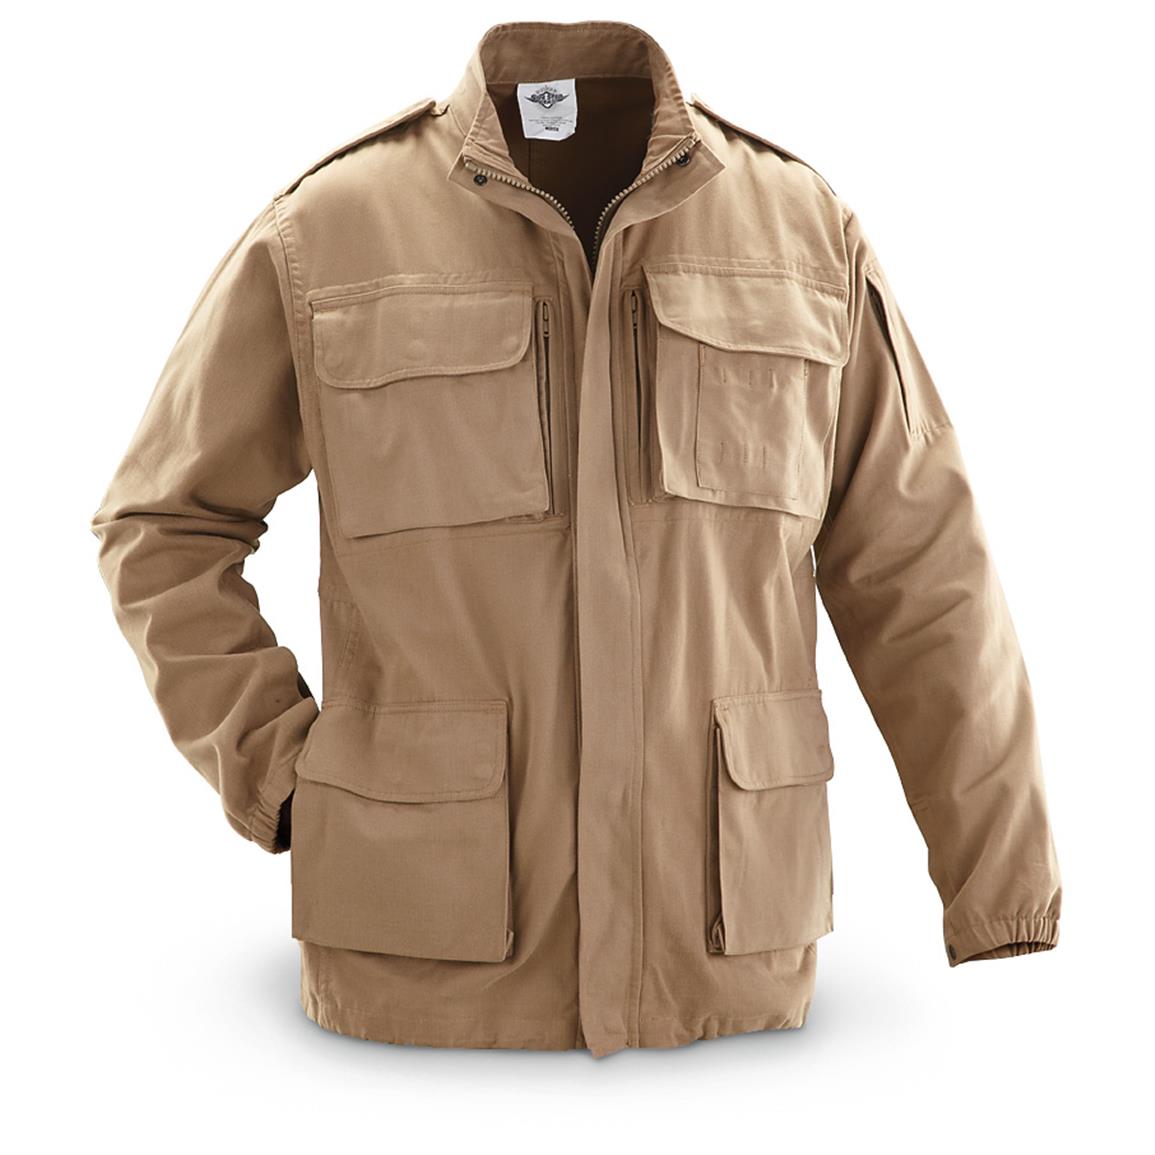 5ive Star Gear Conceal Carry Field Jacket - 608373, Conceal & Carry at ...